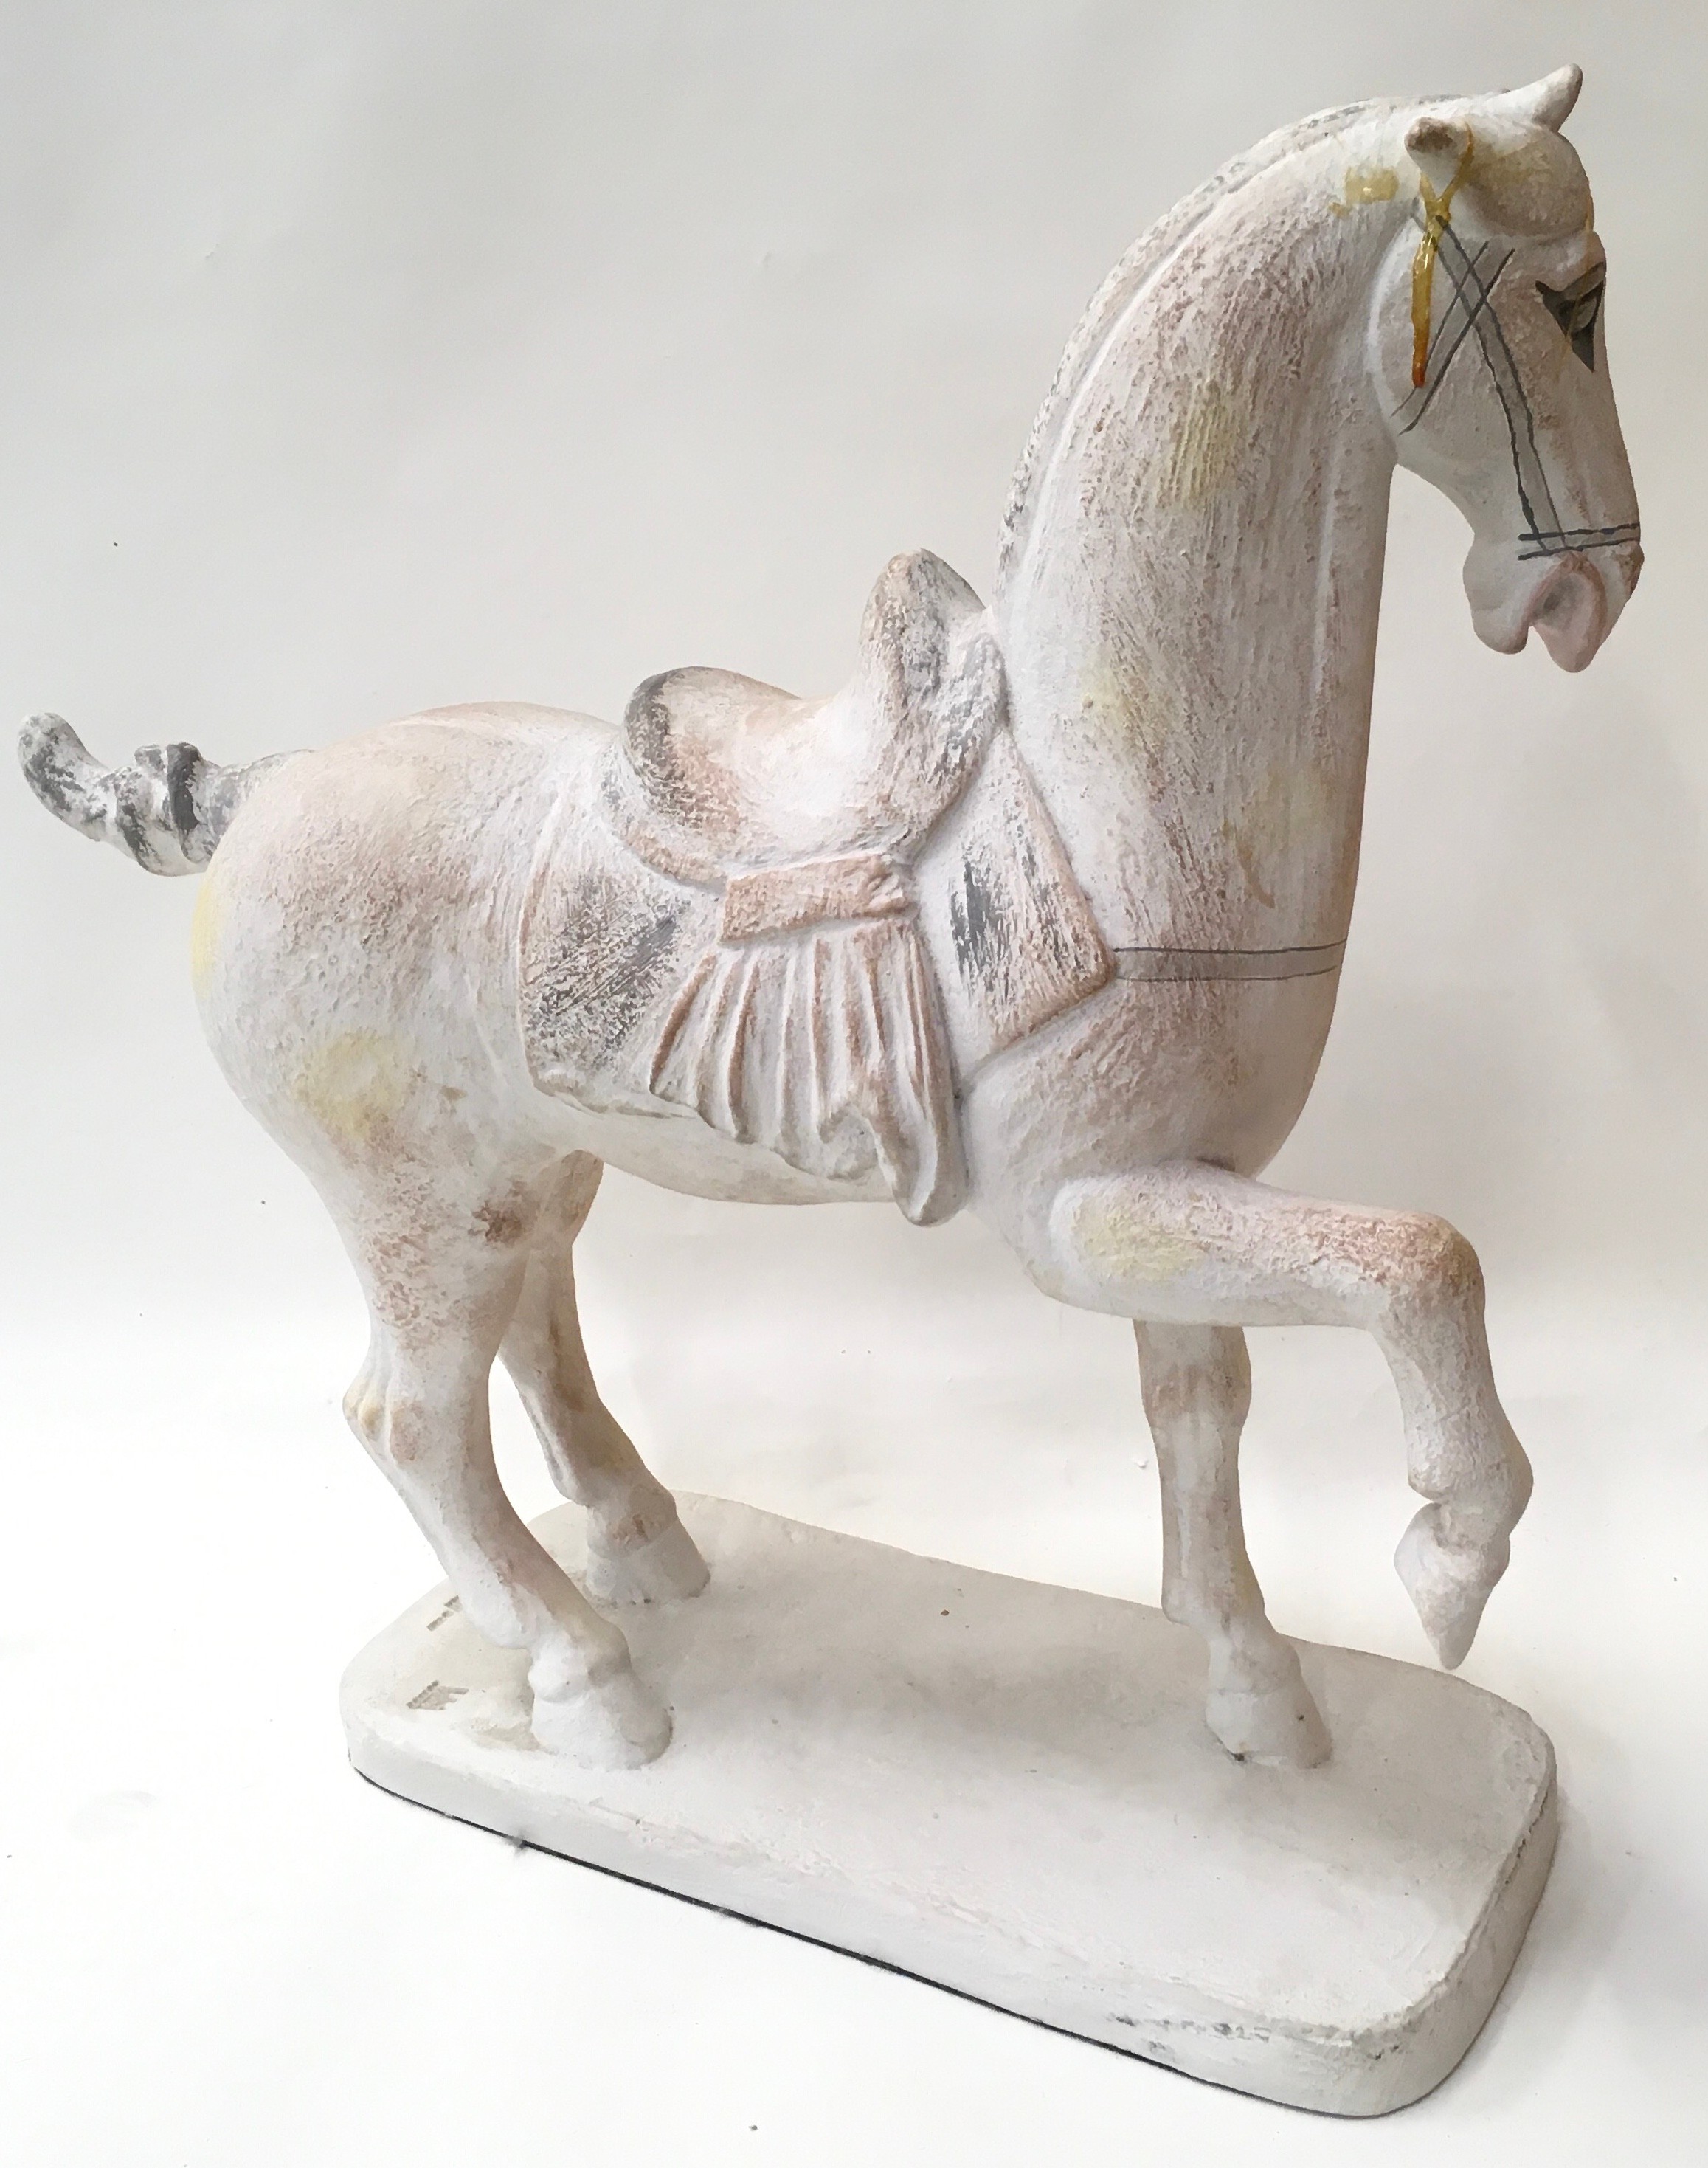 Large pottery horse sculpture by Austin Productions in association with the V&A Museum in the